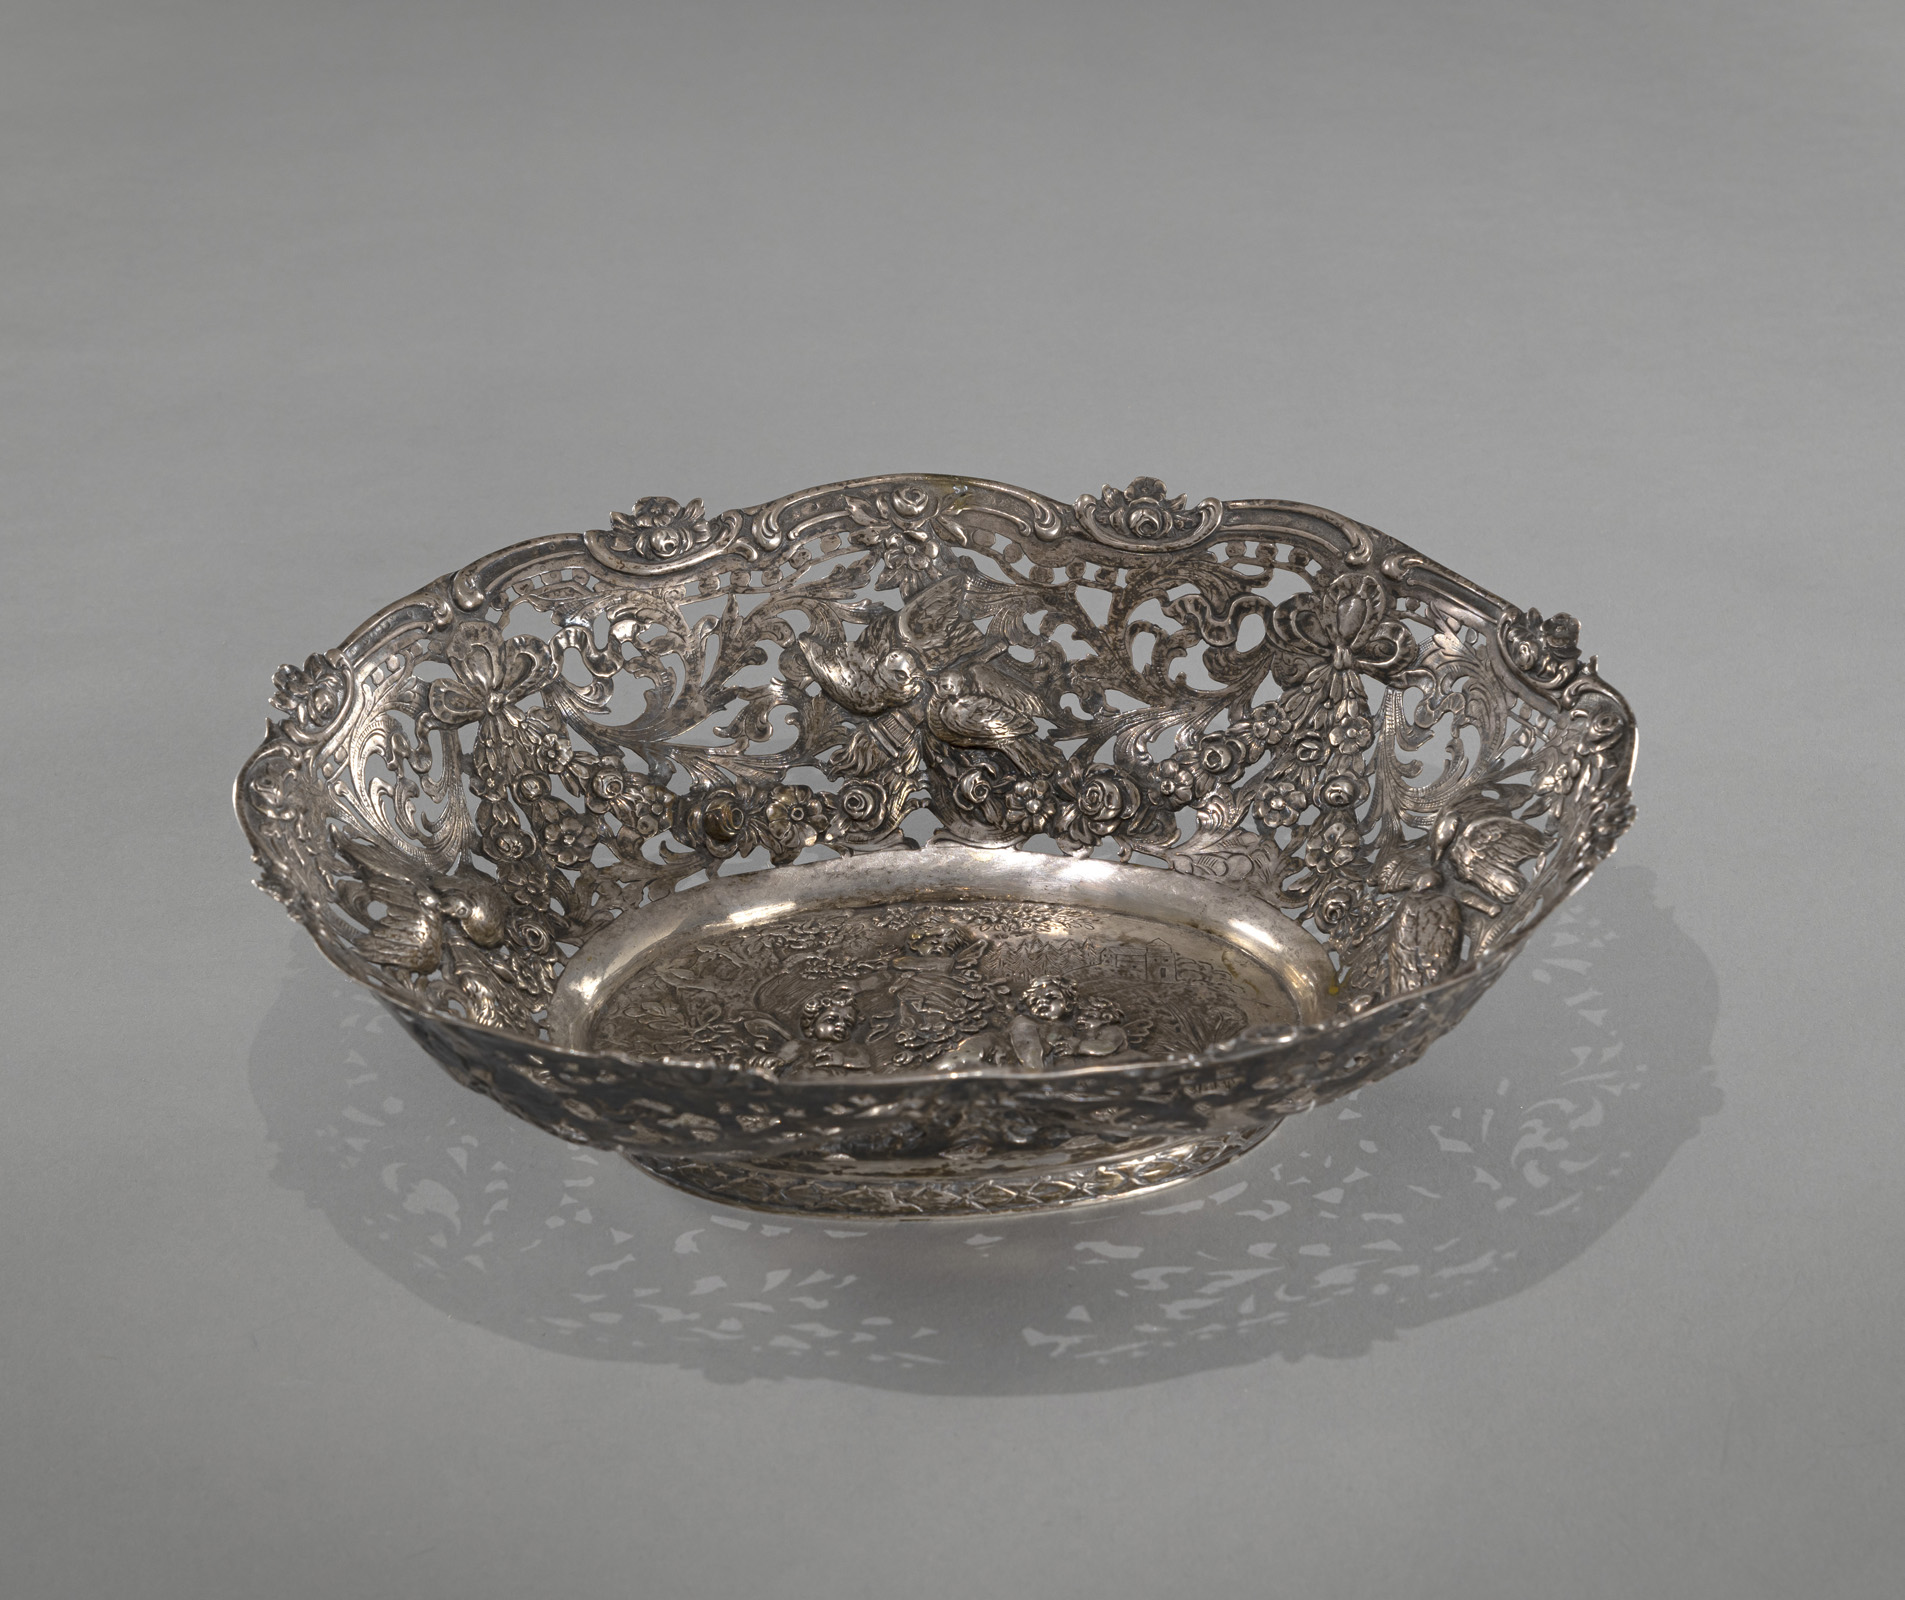 A GERMAN SILVER BASKET WITH PUTTI AND BIRD PATTERN - Image 2 of 5